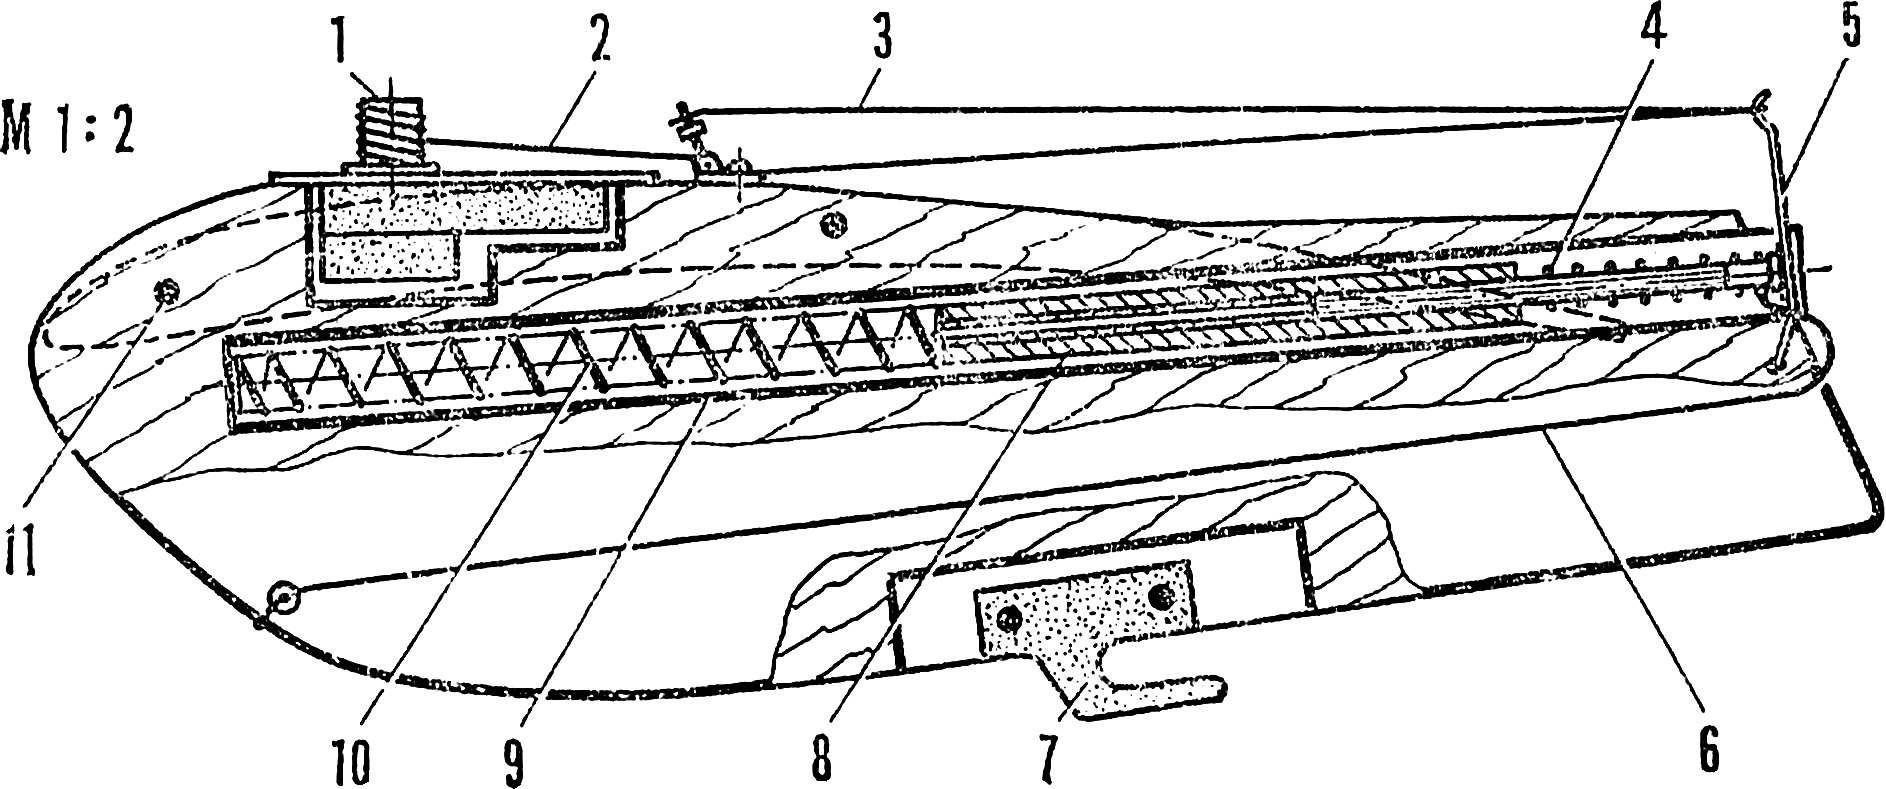 Fig. 2. The fuselage of the model.